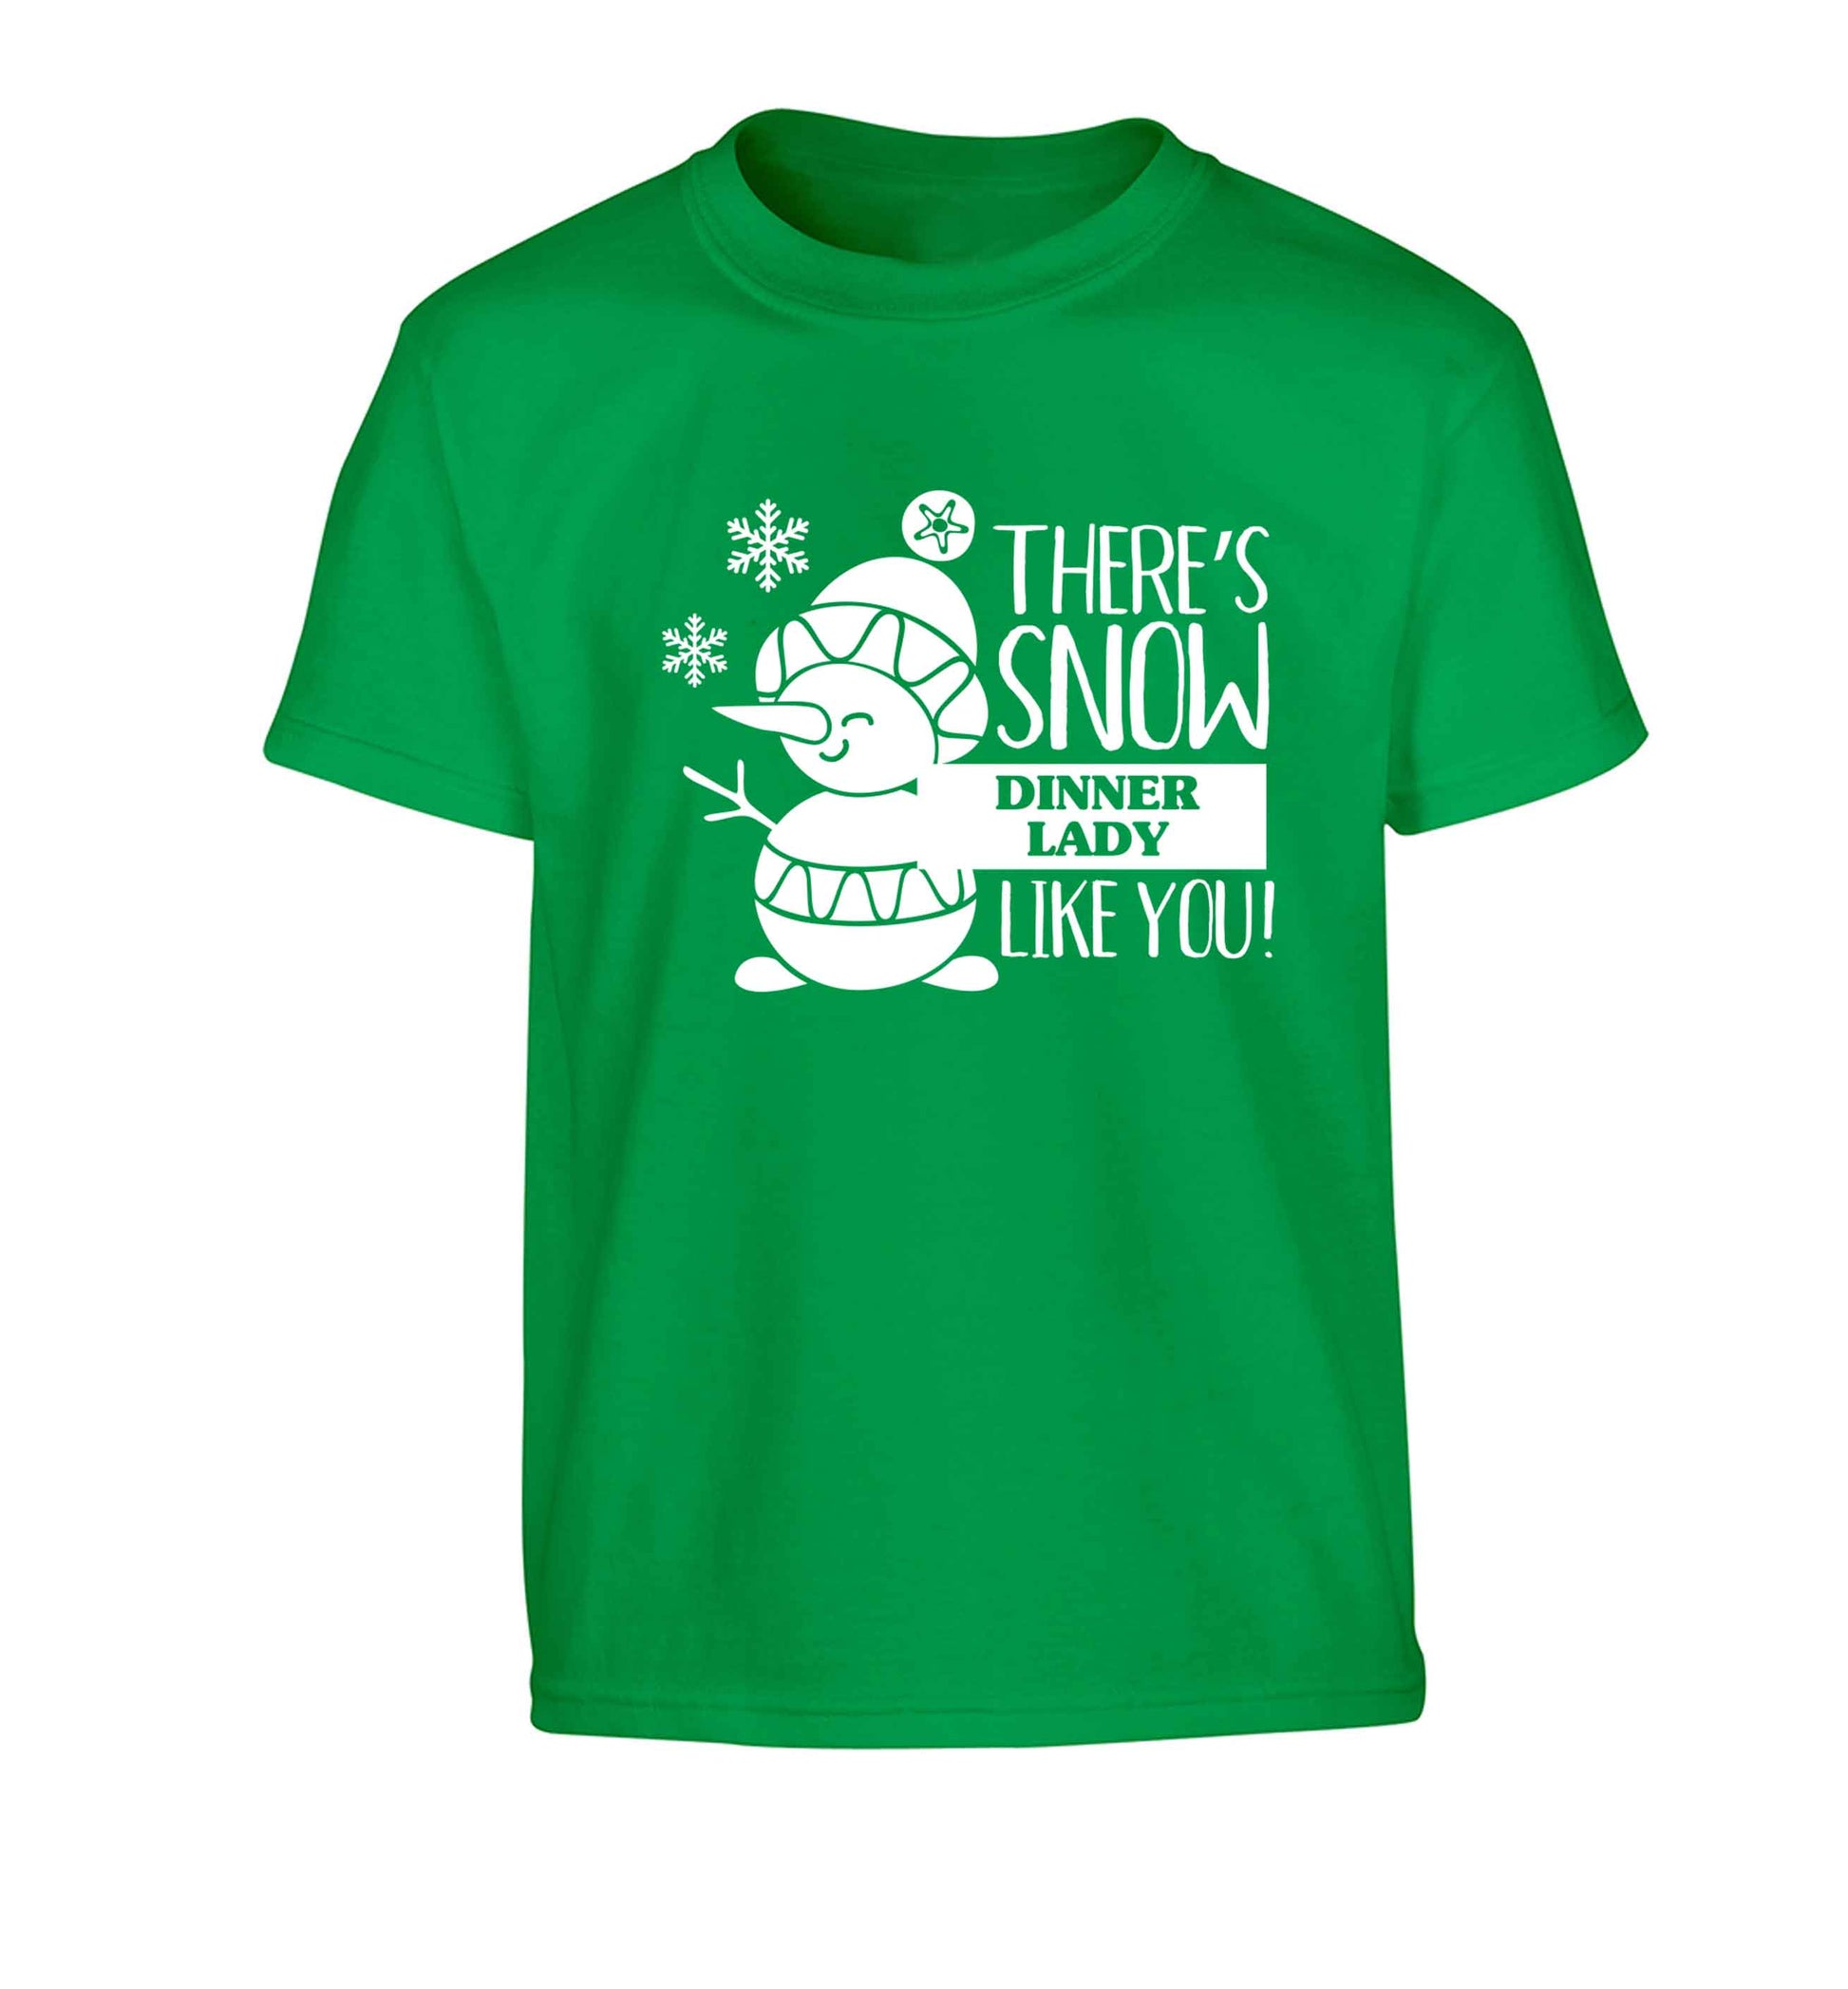 There's snow dinner lady like you Children's green Tshirt 12-13 Years